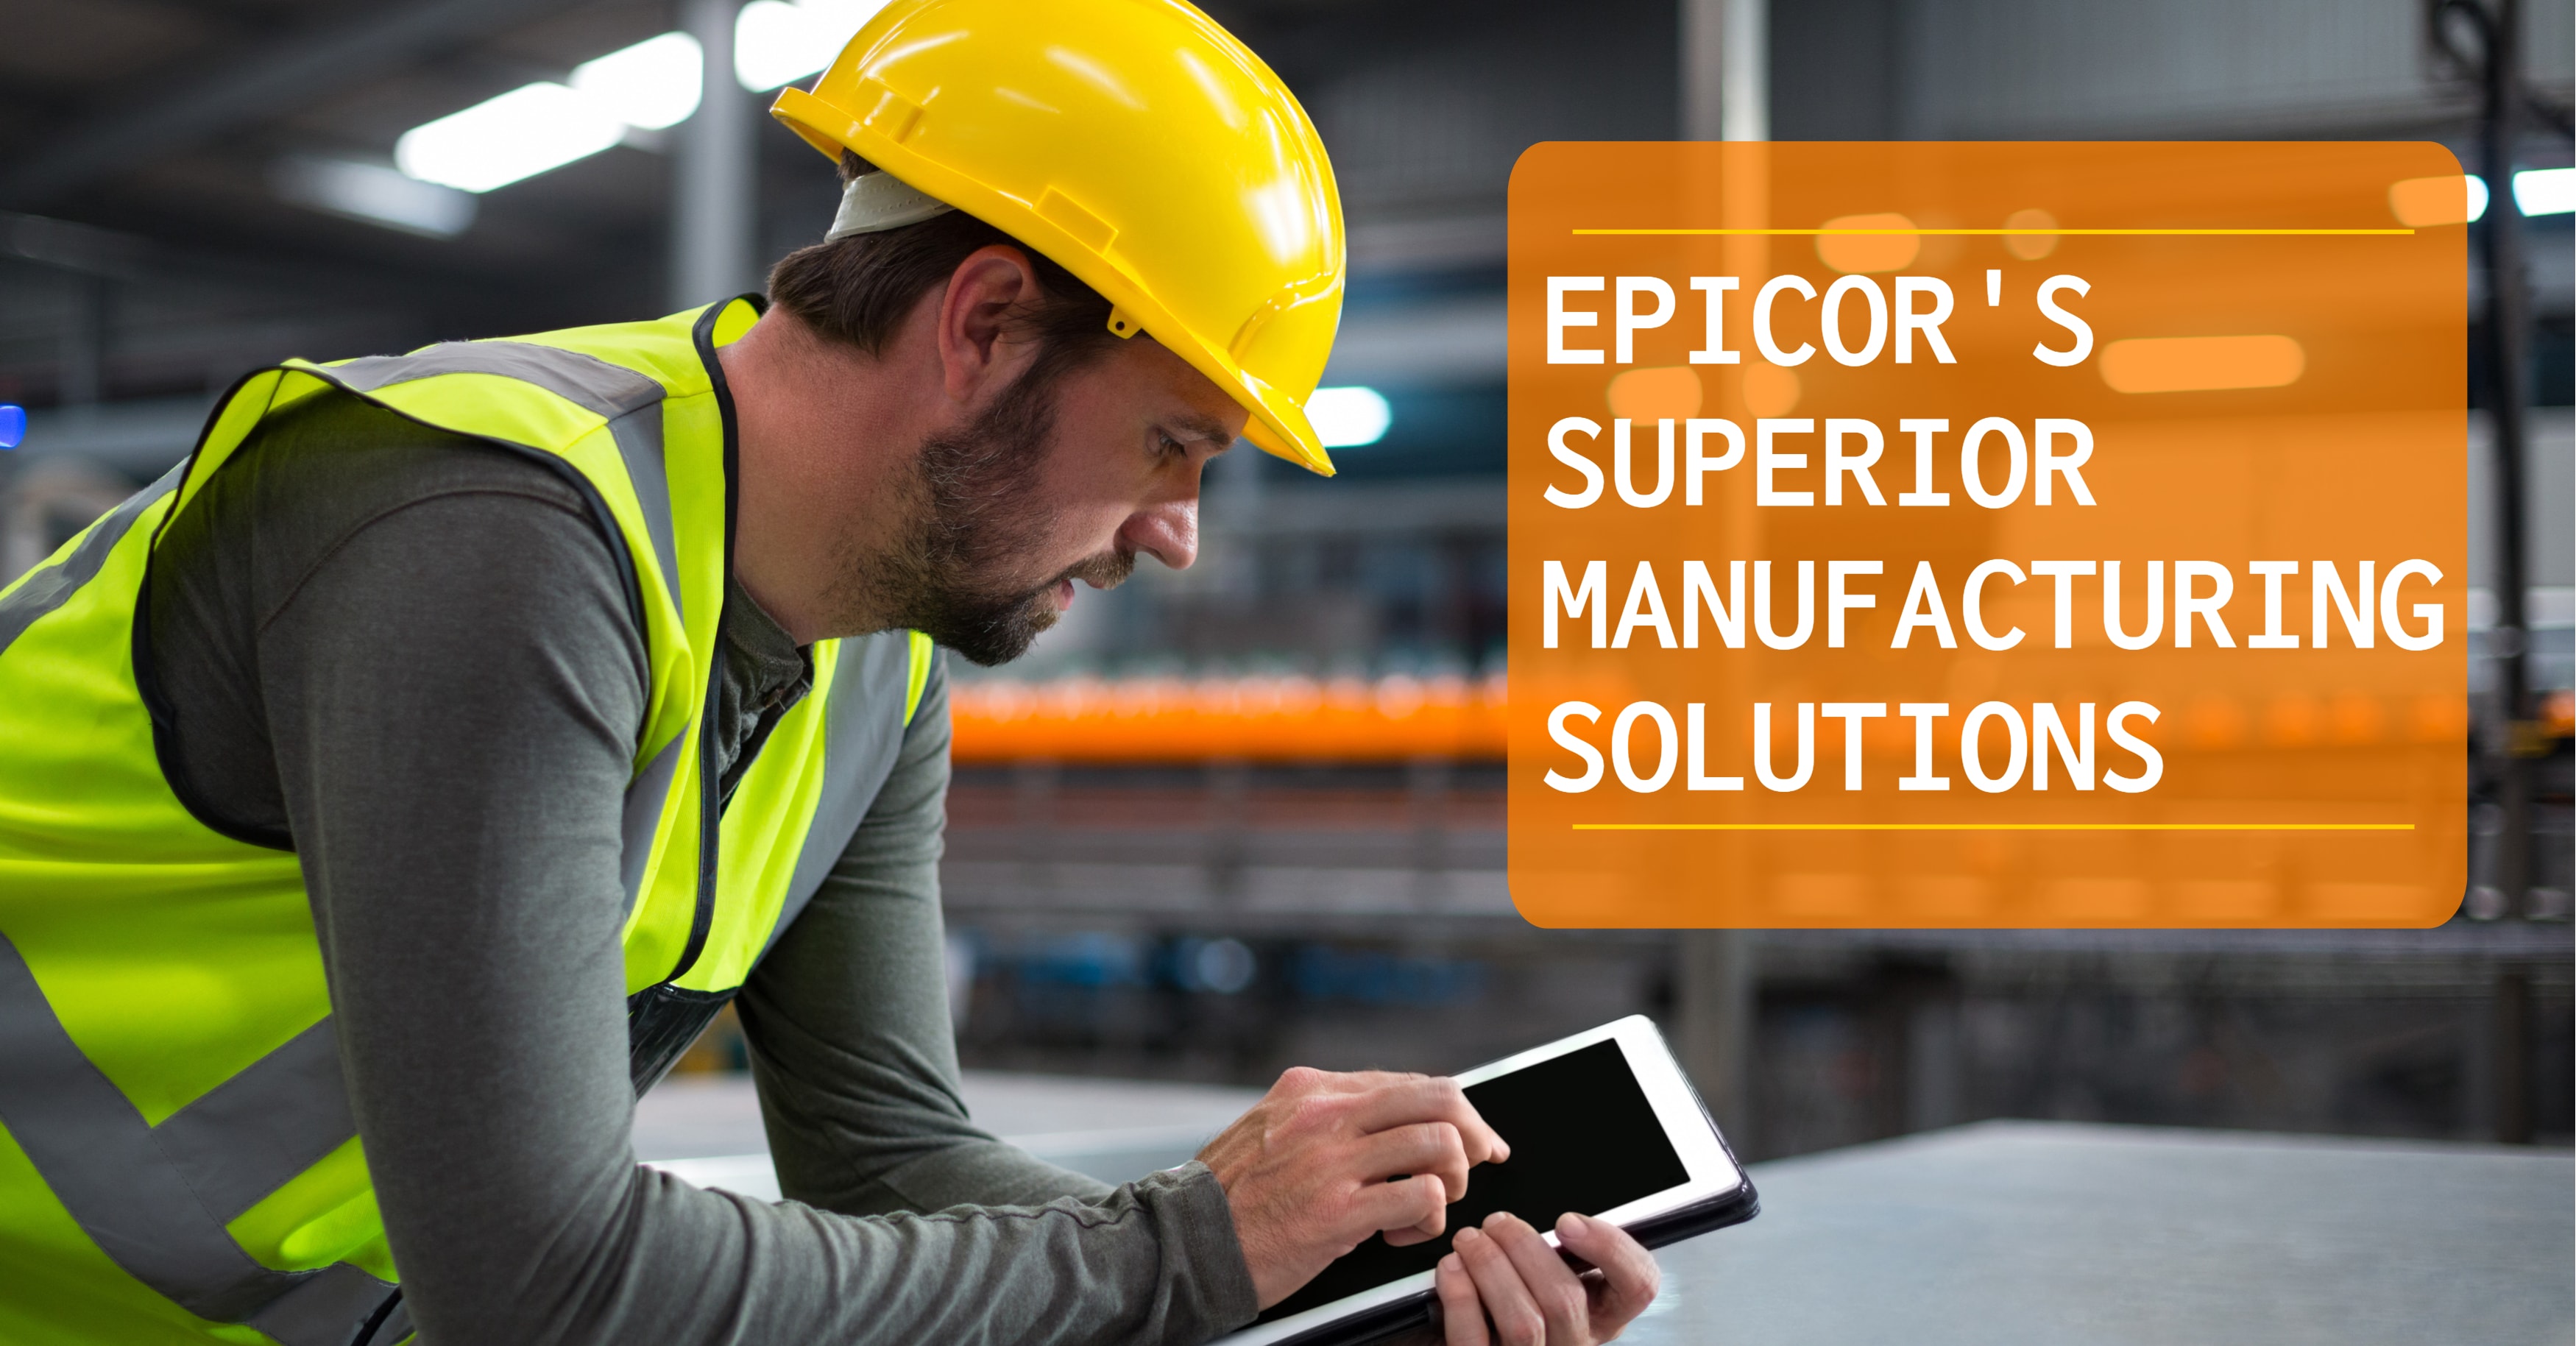 Epicor Manufacturing Solutions